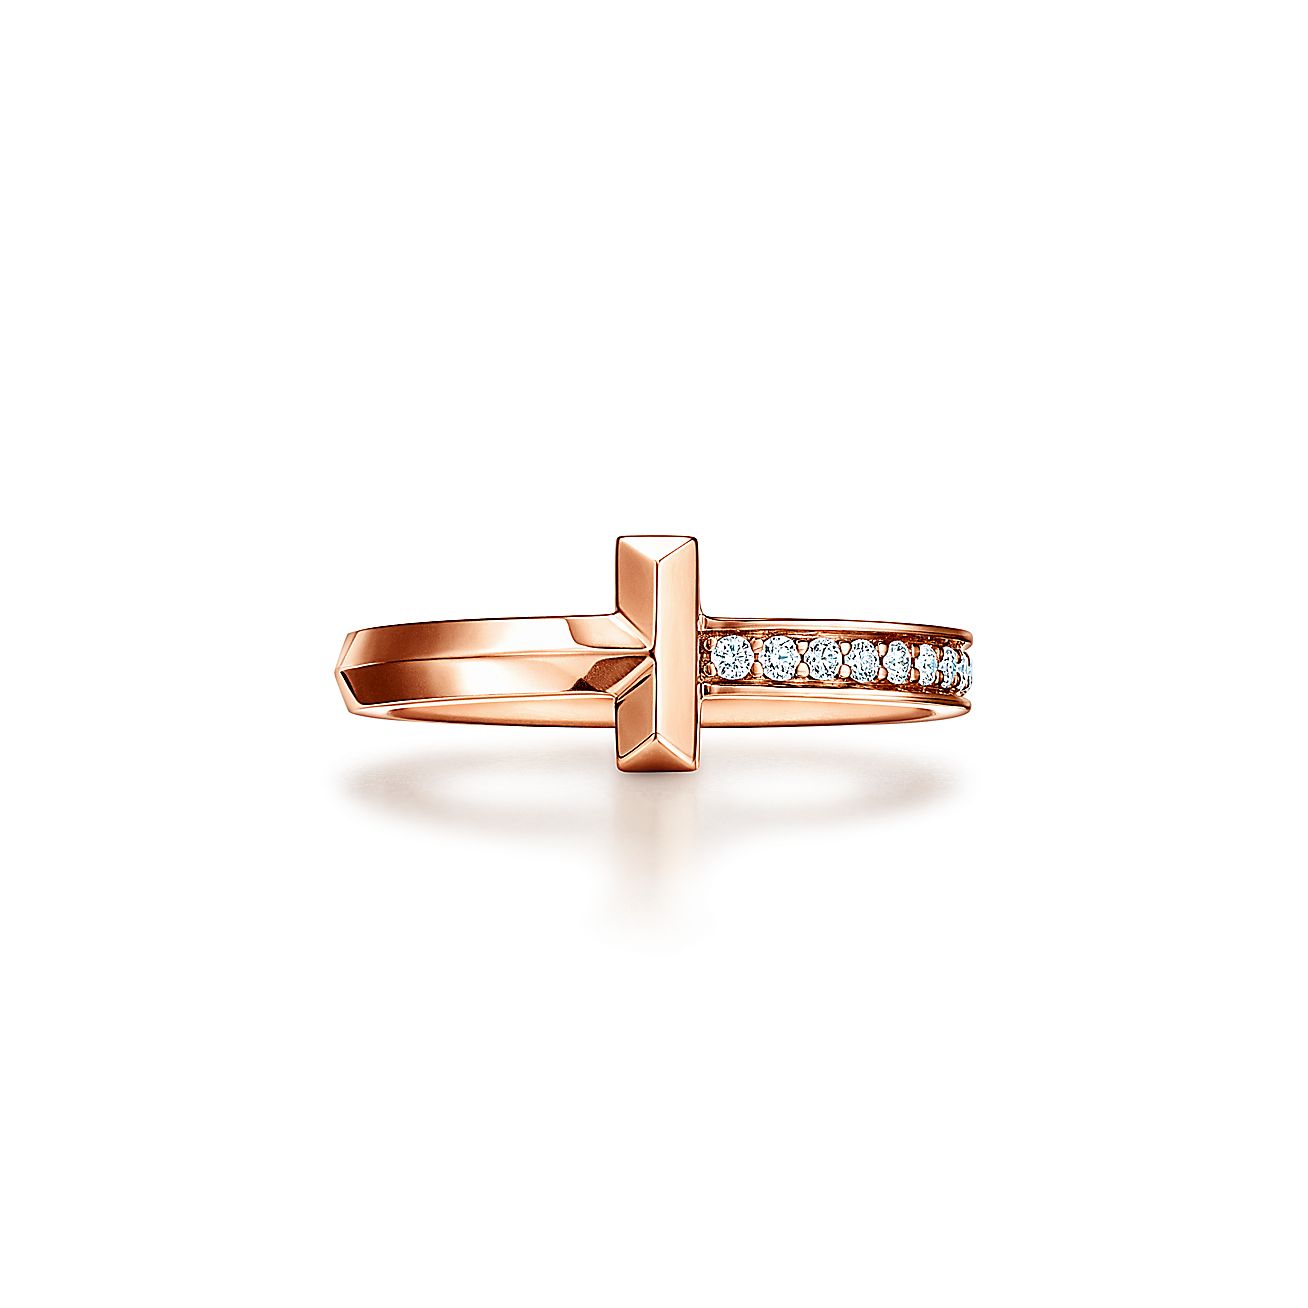 Tiffany TT1 Ring
in Rose Gold with Diamonds, 2.5 mm